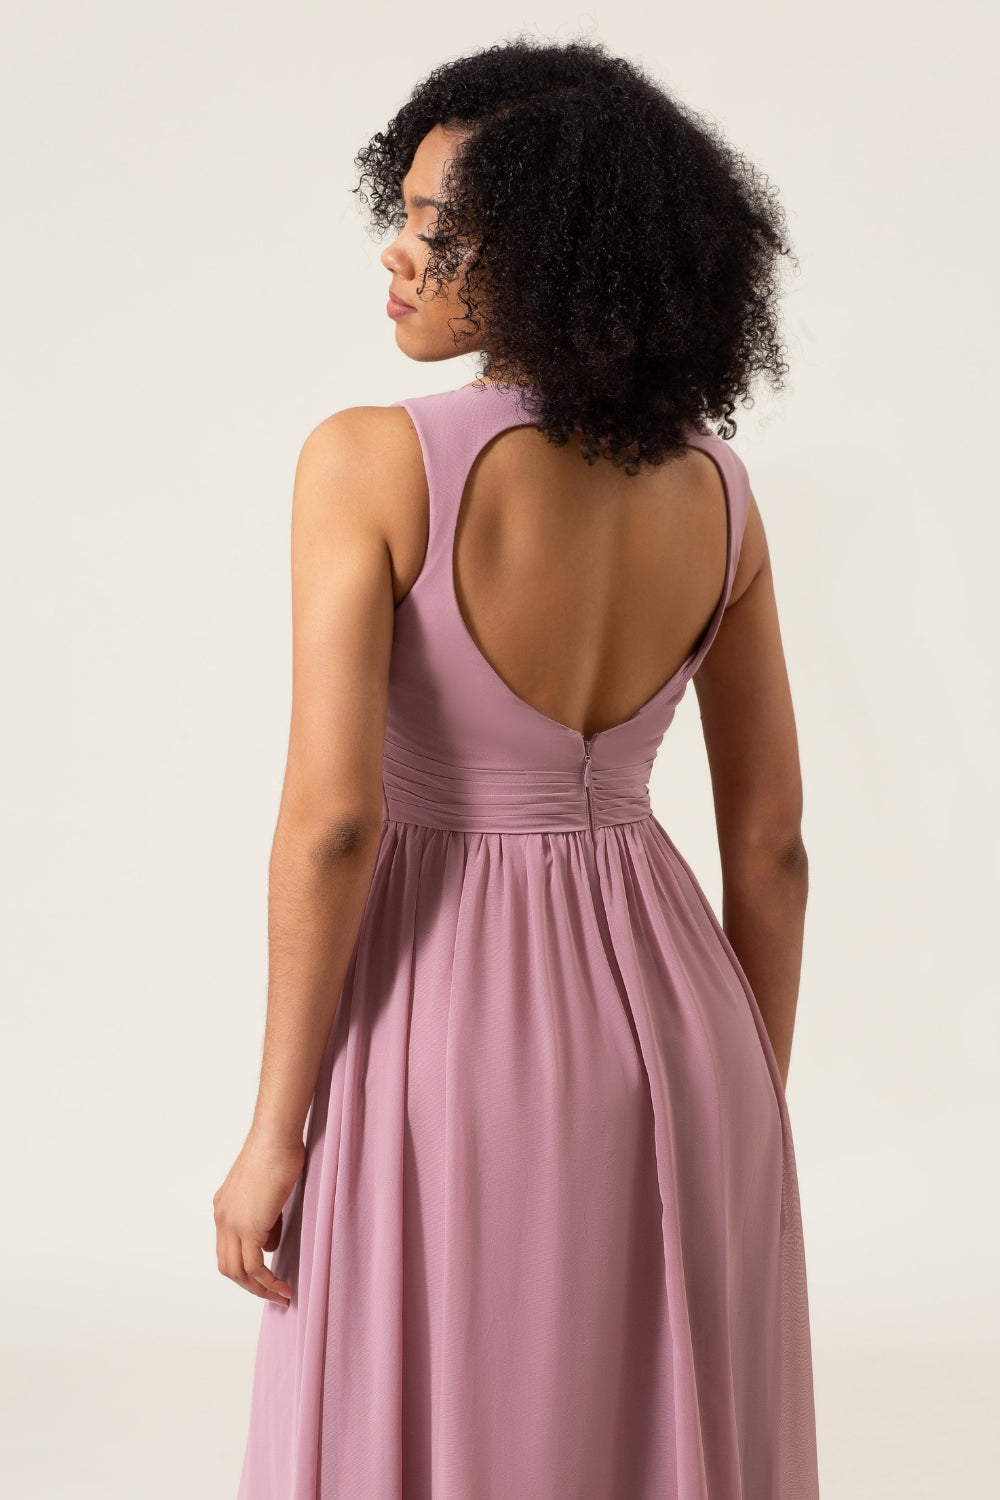 Dusty Rose A-Line Long Chiffon Bridesmaid Dress with Heart Shaped Open Back